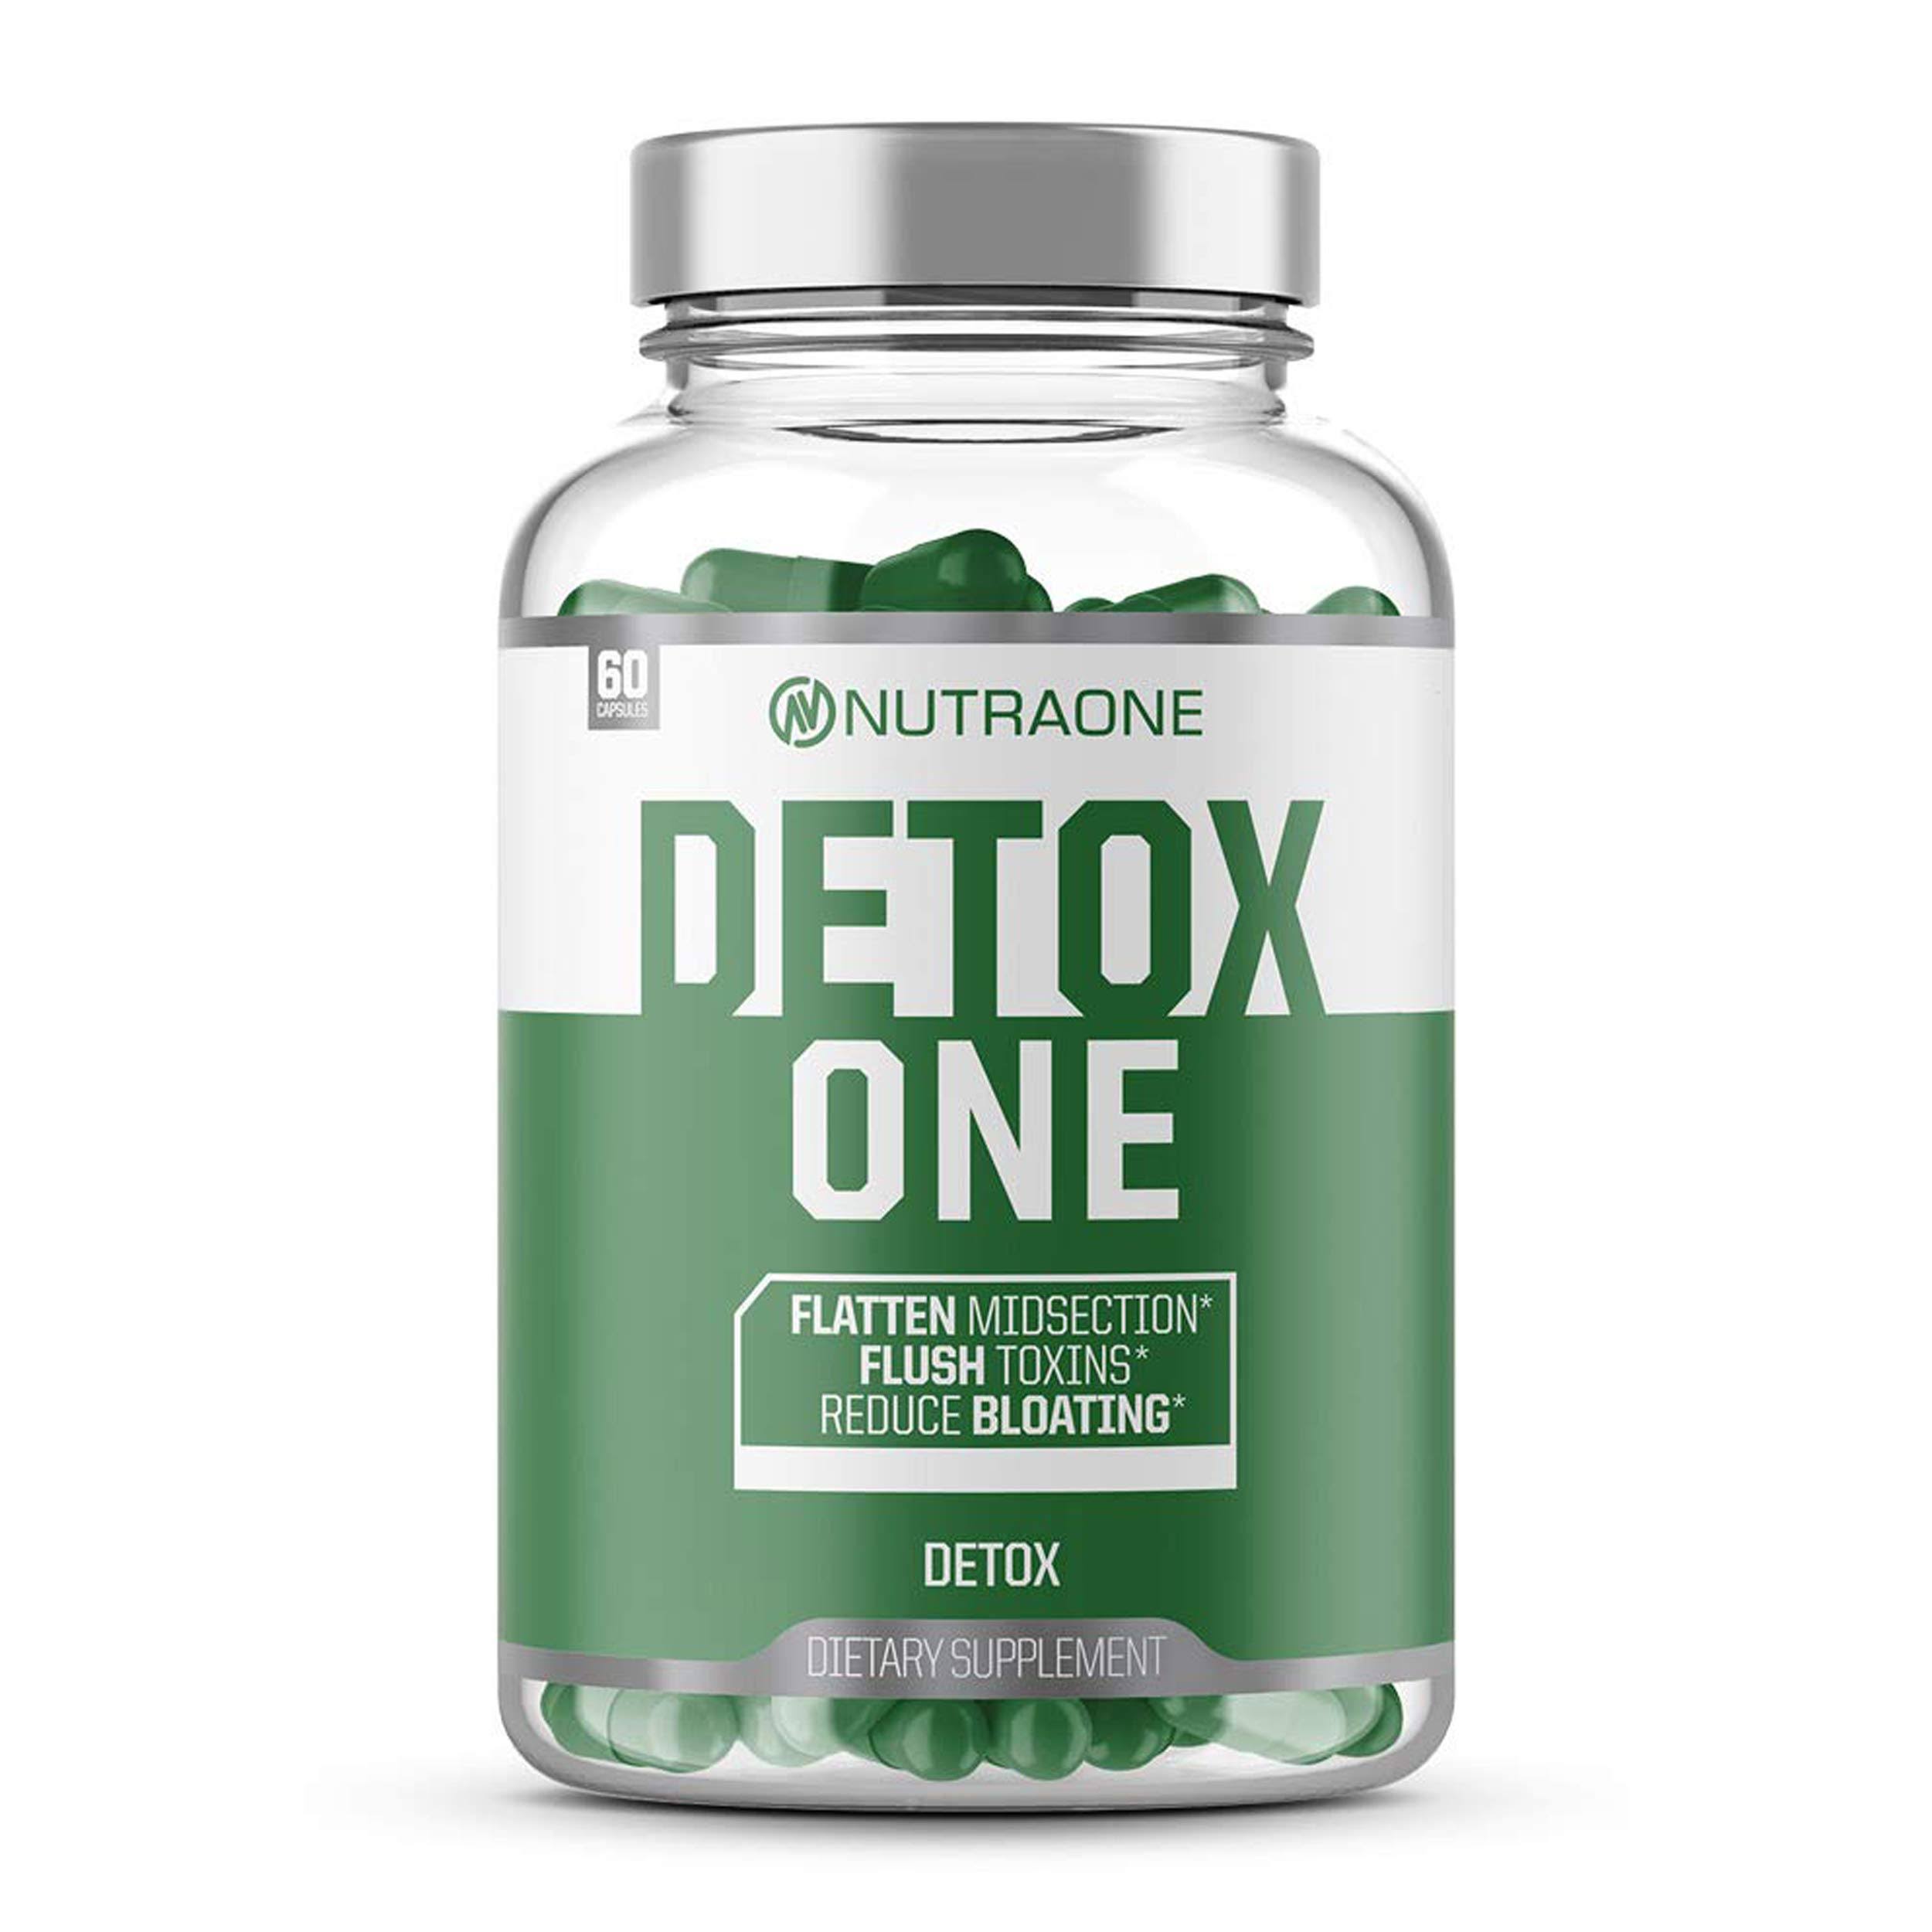 DetoxOne Colon Cleanser & Detox for Weight Loss by NutraOne 60ct